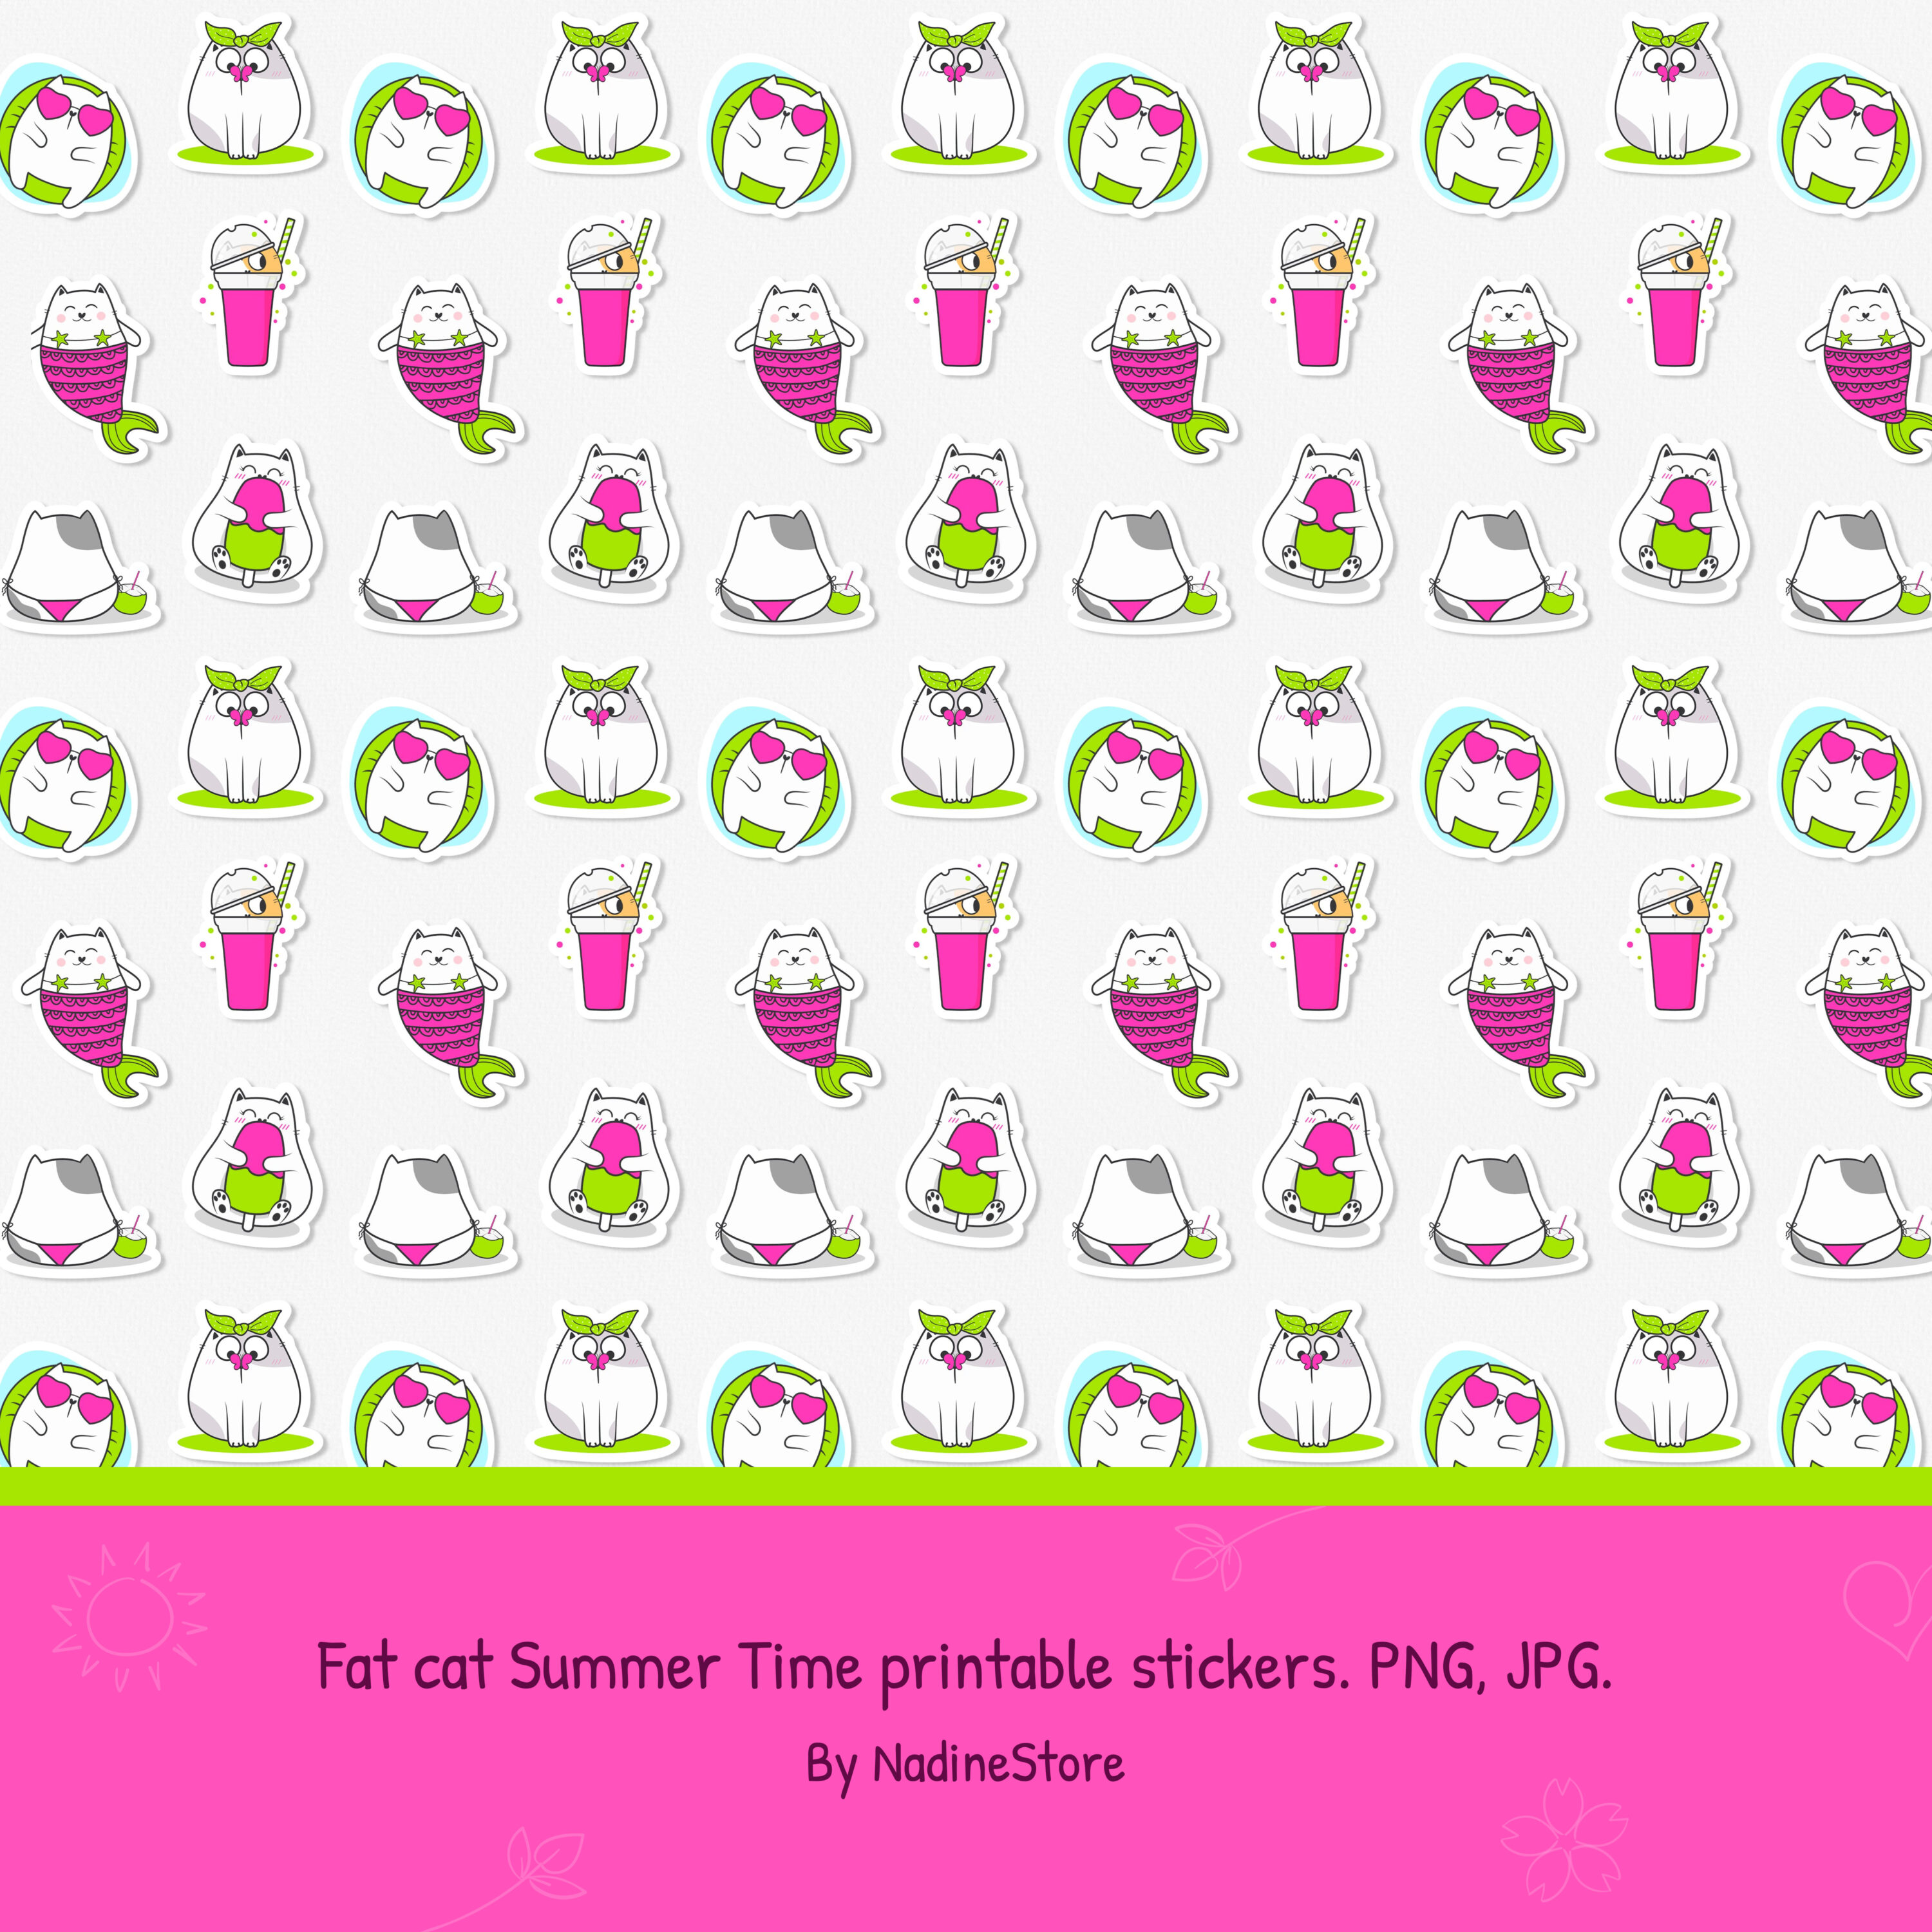 Fat cat summer time printable stickers preview.